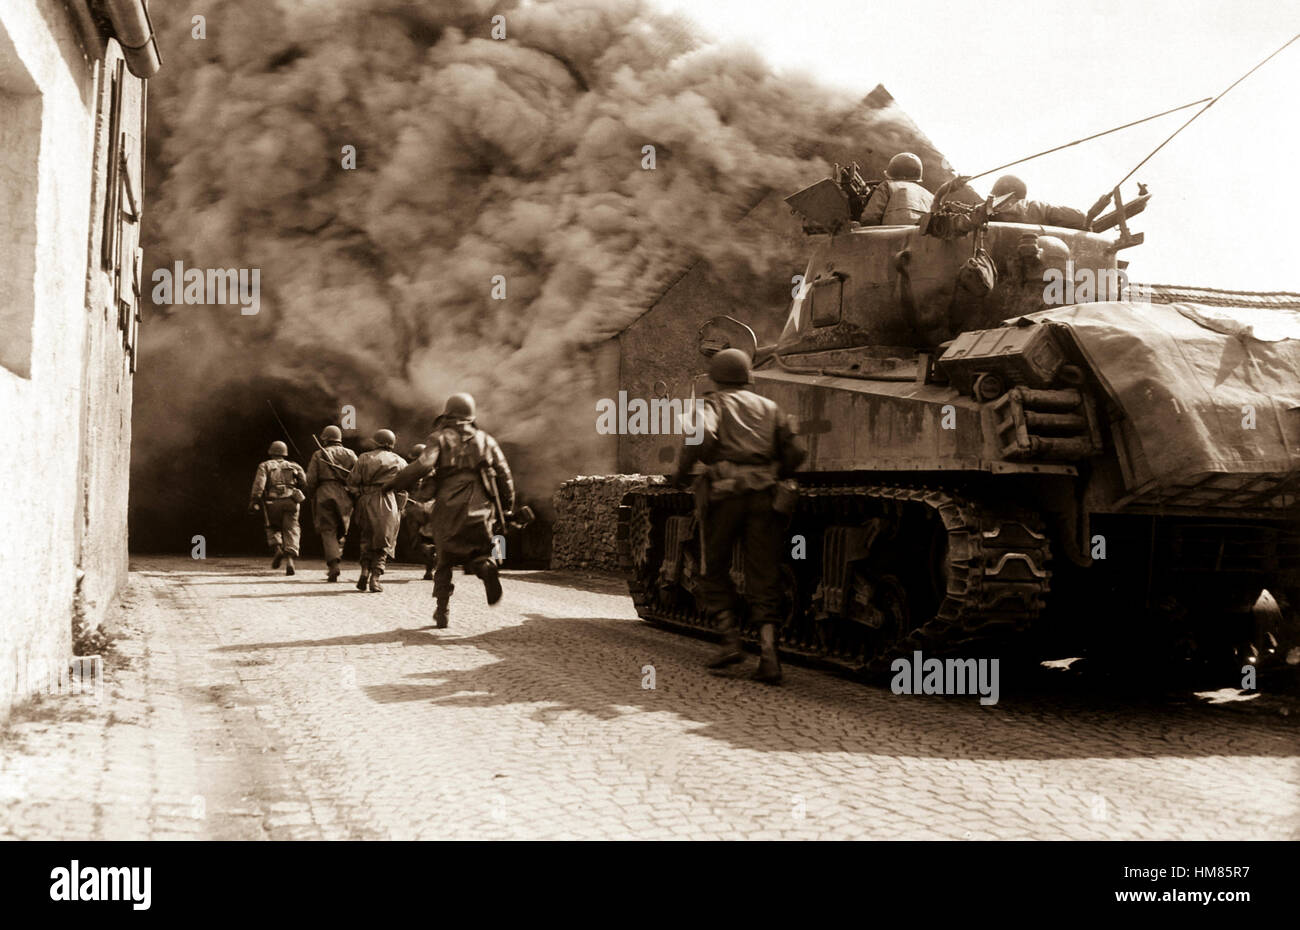 Soldiers of the 55th Armored Infantry Battalion and tank of the 22nd Tank Battalion, move through smoke filled street.  Wernberg, Germany.  April 22, 1945.  Pvt. Joseph Scrippens.  (Army) NARA FILE #:  111-SC-205298 WAR & CONFLICT BOOK #:  1094 Stock Photo